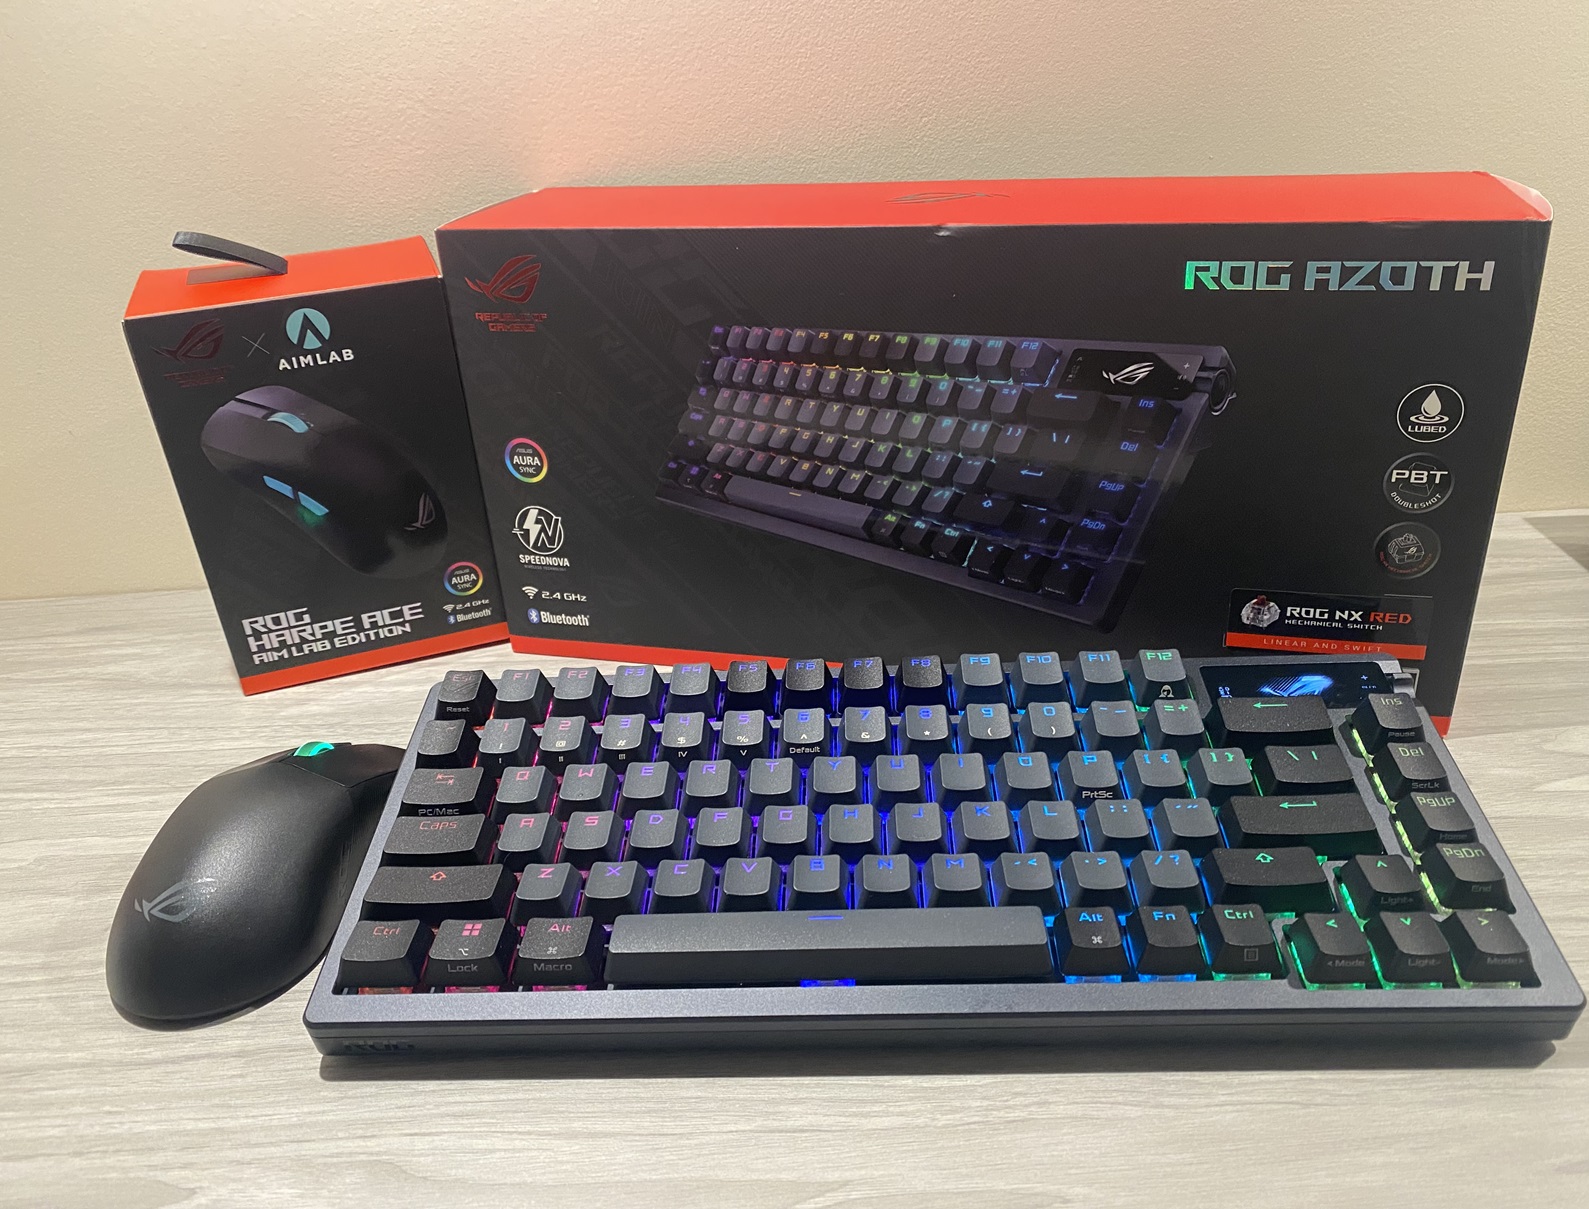 ASUS ROG Azoth gaming keyboard and Harpe Ace mouse review